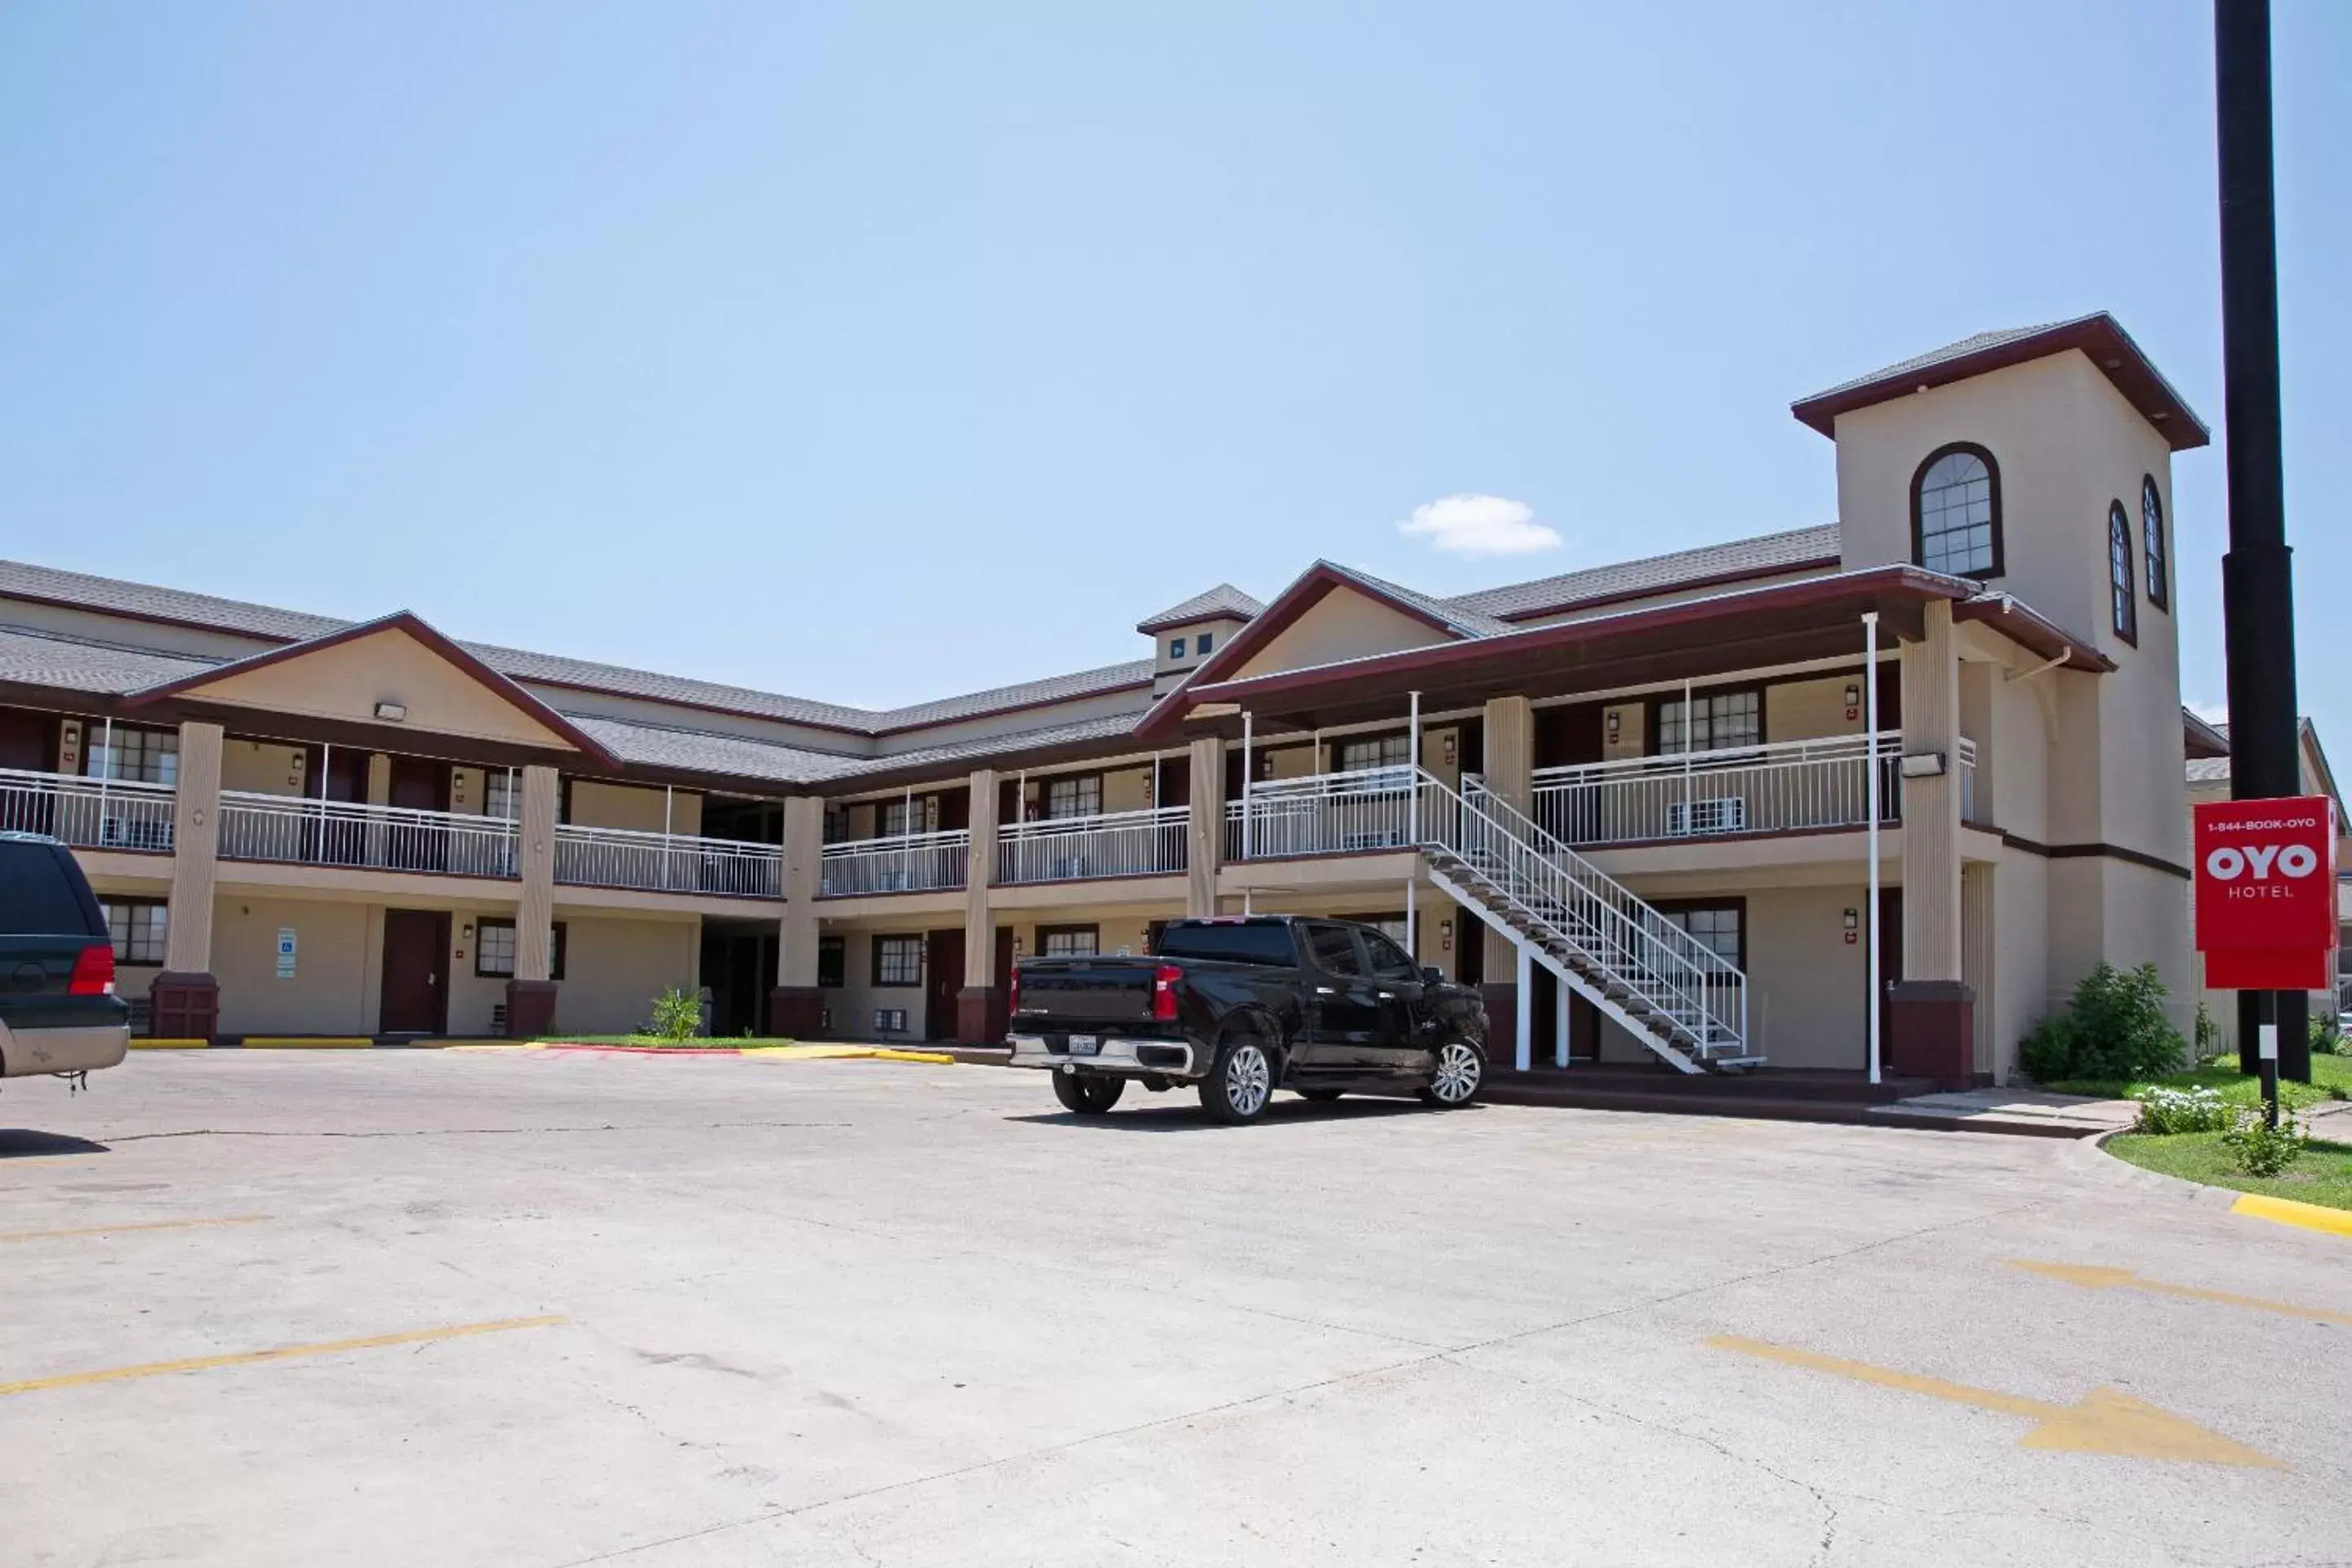 Property Building in OYO Hotel McAllen Airport South